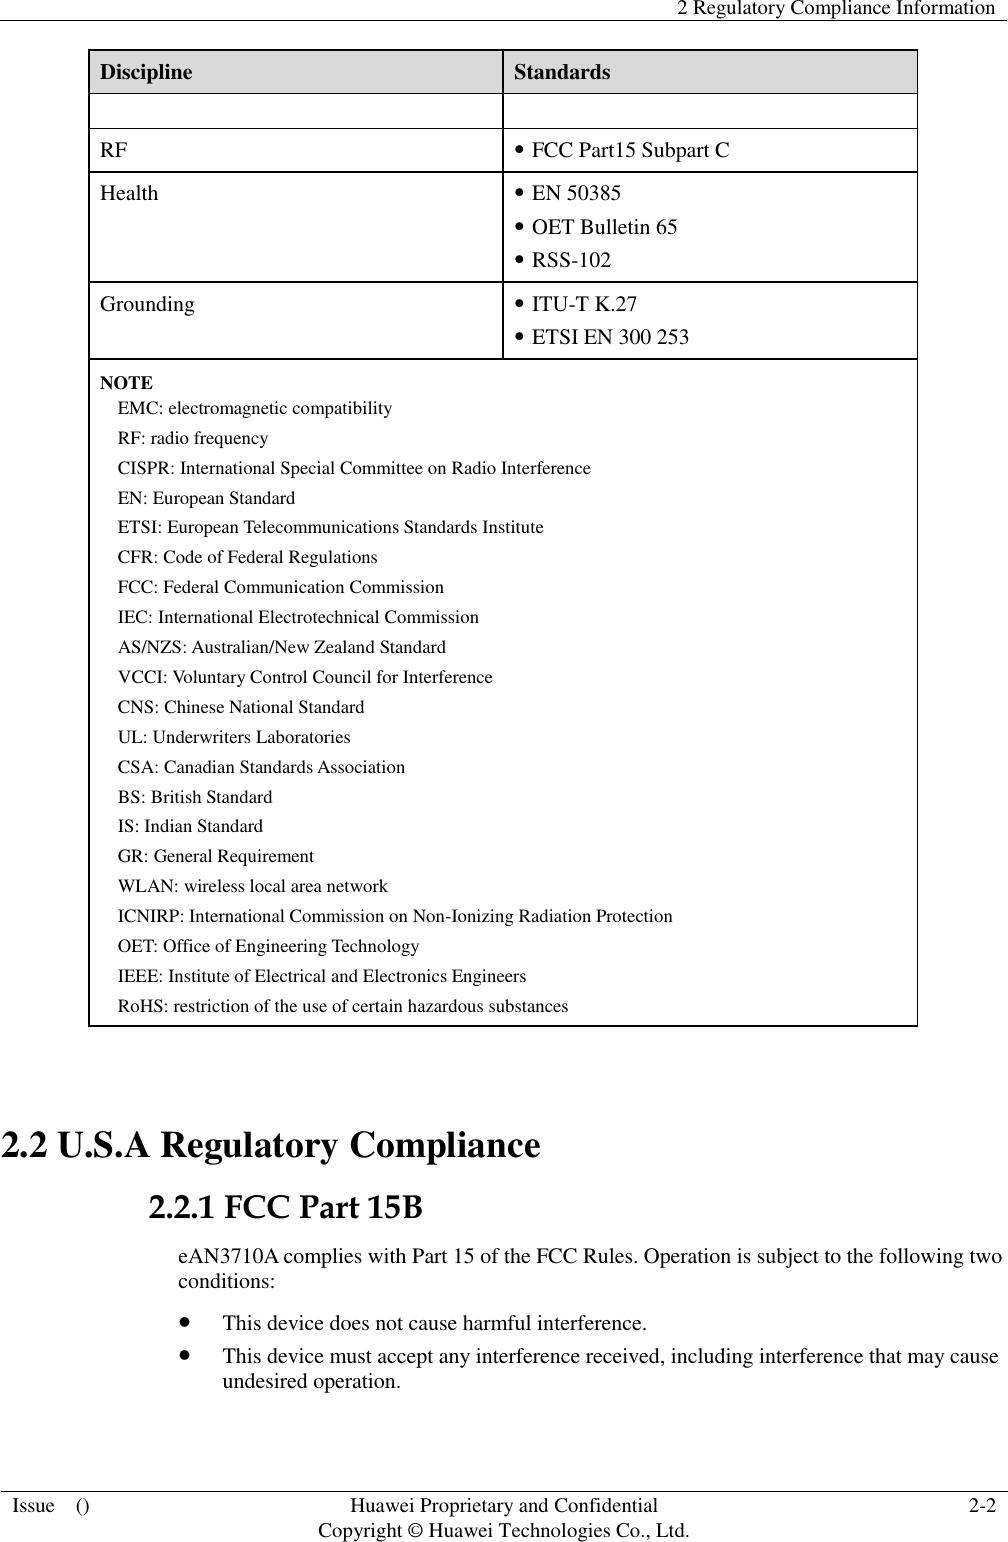   2 Regulatory Compliance Information  Issue    () Huawei Proprietary and Confidential                                     Copyright © Huawei Technologies Co., Ltd. 2-2  Discipline Standards  RF  FCC Part15 Subpart C Health  EN 50385  OET Bulletin 65  RSS-102 Grounding  ITU-T K.27  ETSI EN 300 253 NOTE EMC: electromagnetic compatibility RF: radio frequency CISPR: International Special Committee on Radio Interference EN: European Standard ETSI: European Telecommunications Standards Institute CFR: Code of Federal Regulations FCC: Federal Communication Commission IEC: International Electrotechnical Commission AS/NZS: Australian/New Zealand Standard VCCI: Voluntary Control Council for Interference CNS: Chinese National Standard UL: Underwriters Laboratories CSA: Canadian Standards Association BS: British Standard IS: Indian Standard GR: General Requirement WLAN: wireless local area network ICNIRP: International Commission on Non-Ionizing Radiation Protection OET: Office of Engineering Technology IEEE: Institute of Electrical and Electronics Engineers RoHS: restriction of the use of certain hazardous substances  2.2 U.S.A Regulatory Compliance 2.2.1 FCC Part 15B eAN3710A complies with Part 15 of the FCC Rules. Operation is subject to the following two conditions:  This device does not cause harmful interference.  This device must accept any interference received, including interference that may cause undesired operation. 